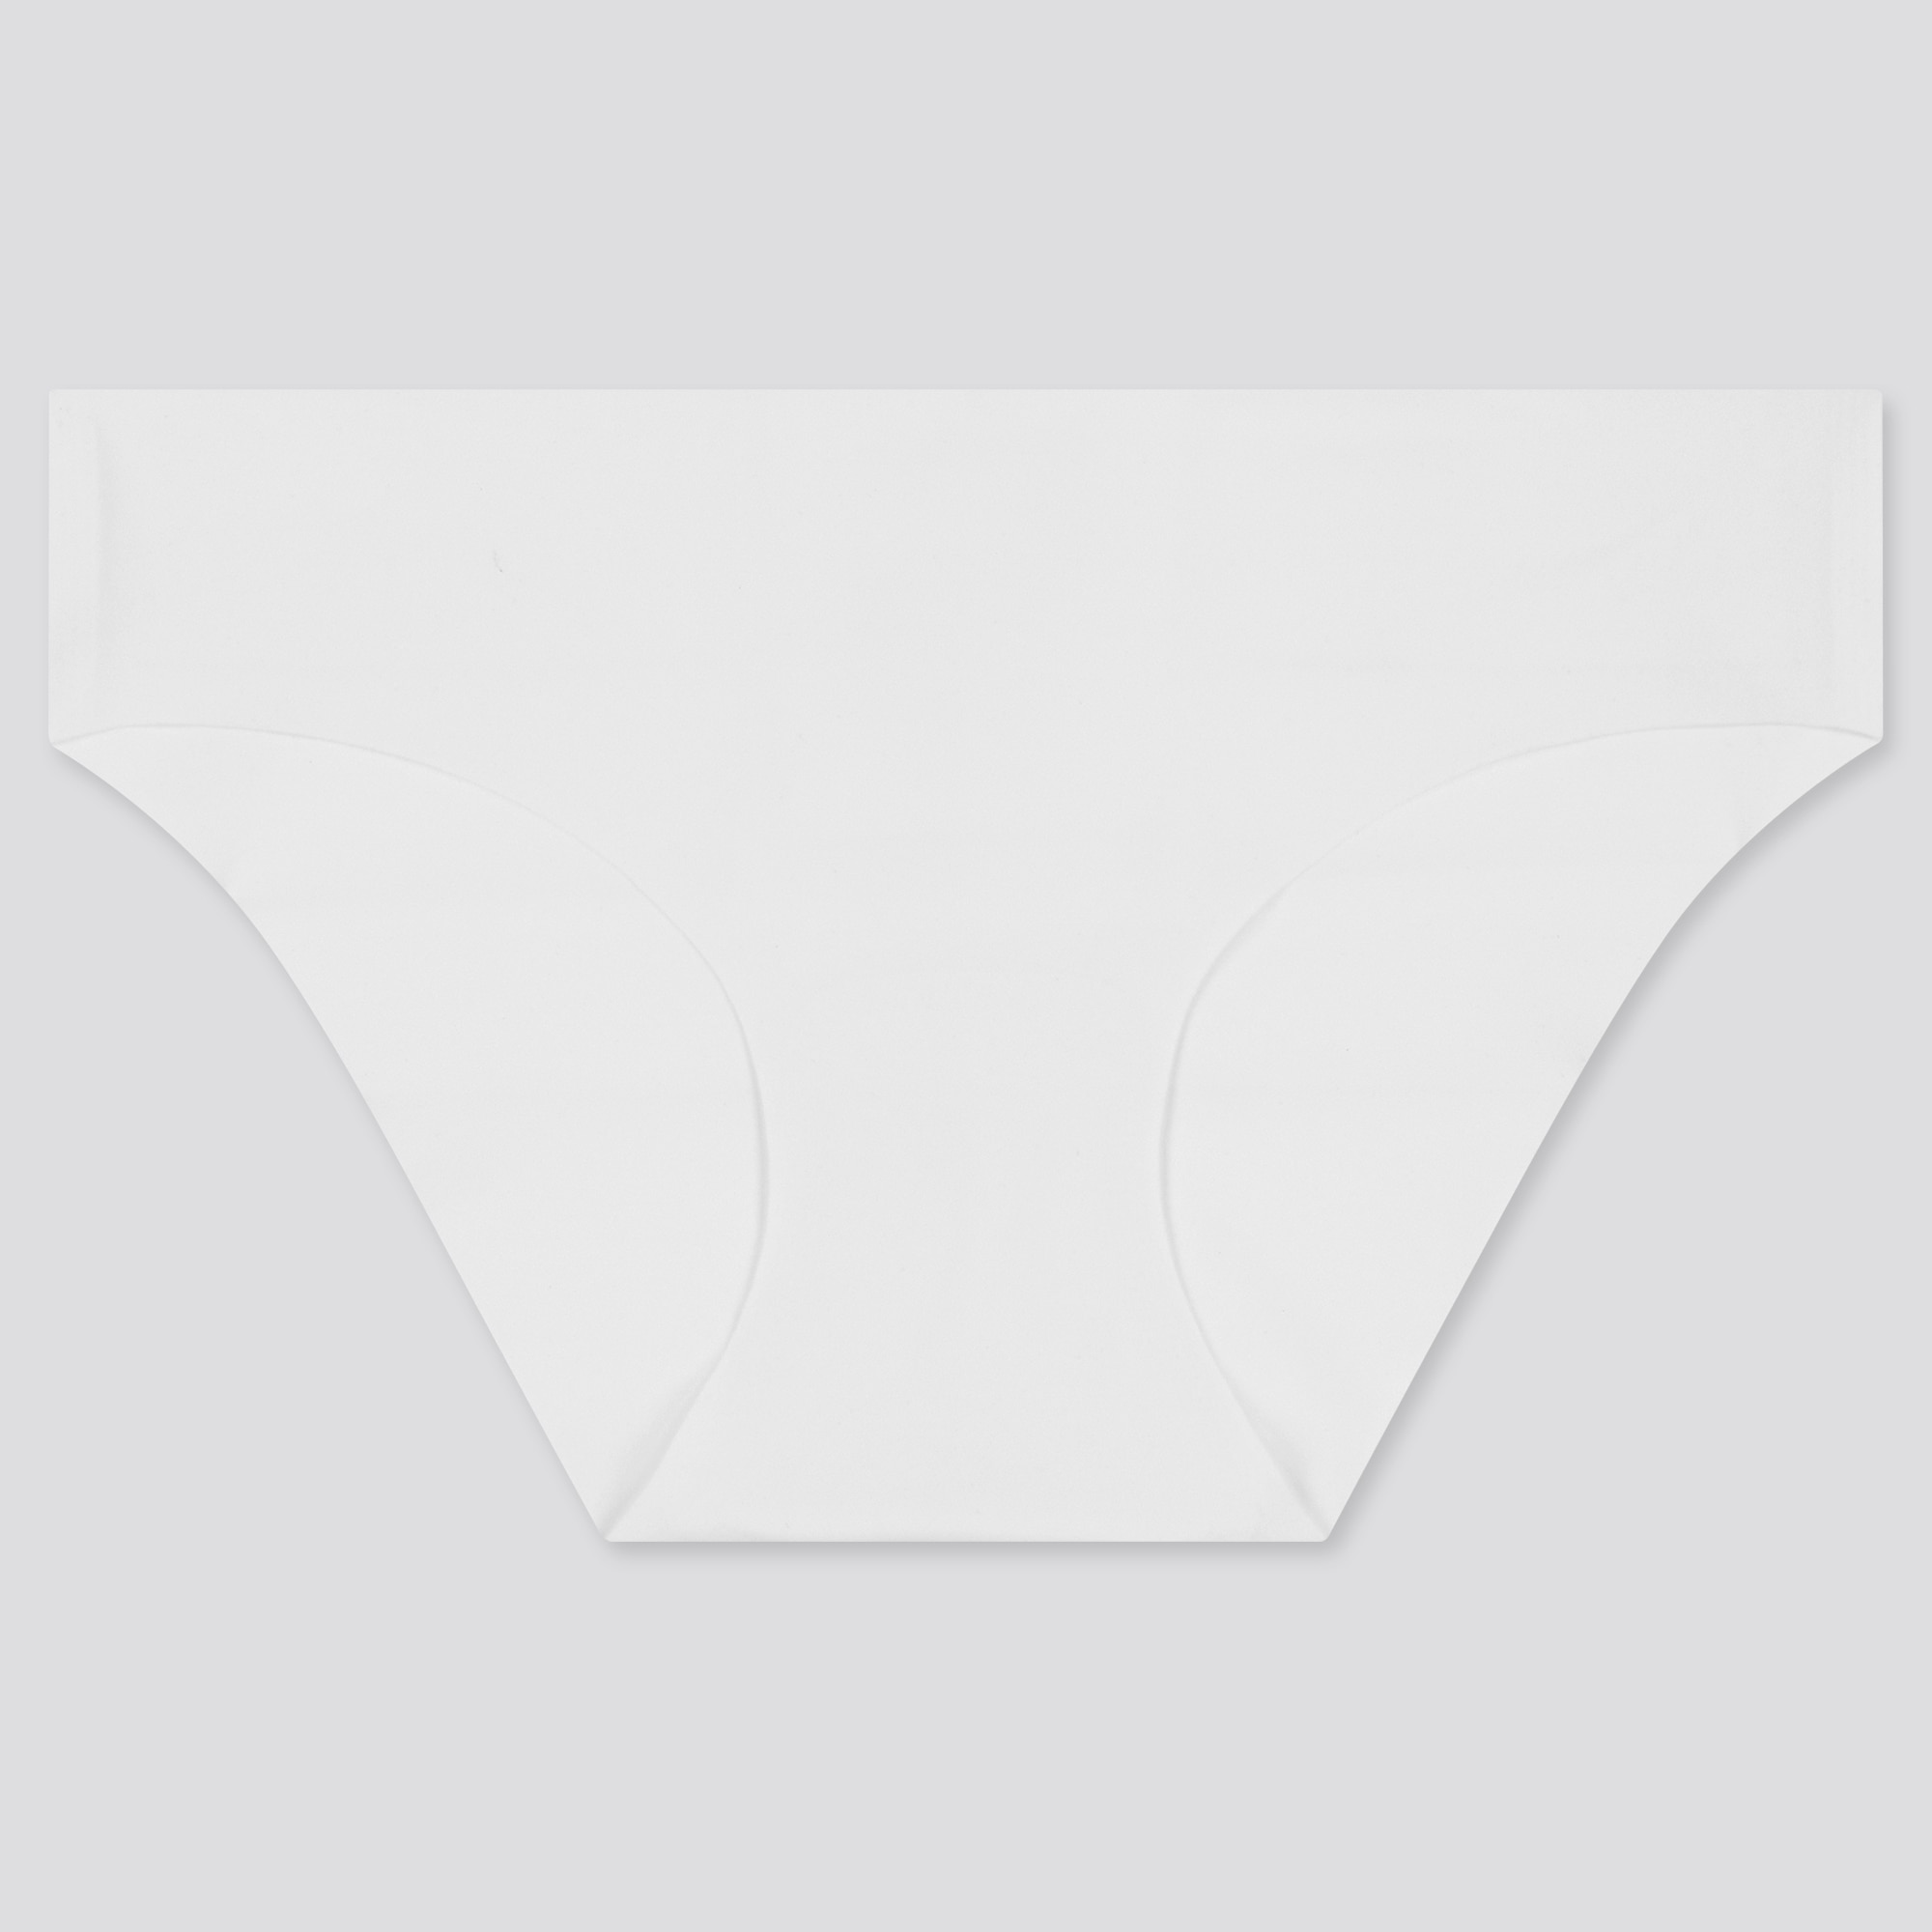 Sexy Low Waisted Bikini Sets Underwired With Air Bra And Panties  Transparent Womens Underwear From Bikini_designer, $22.49